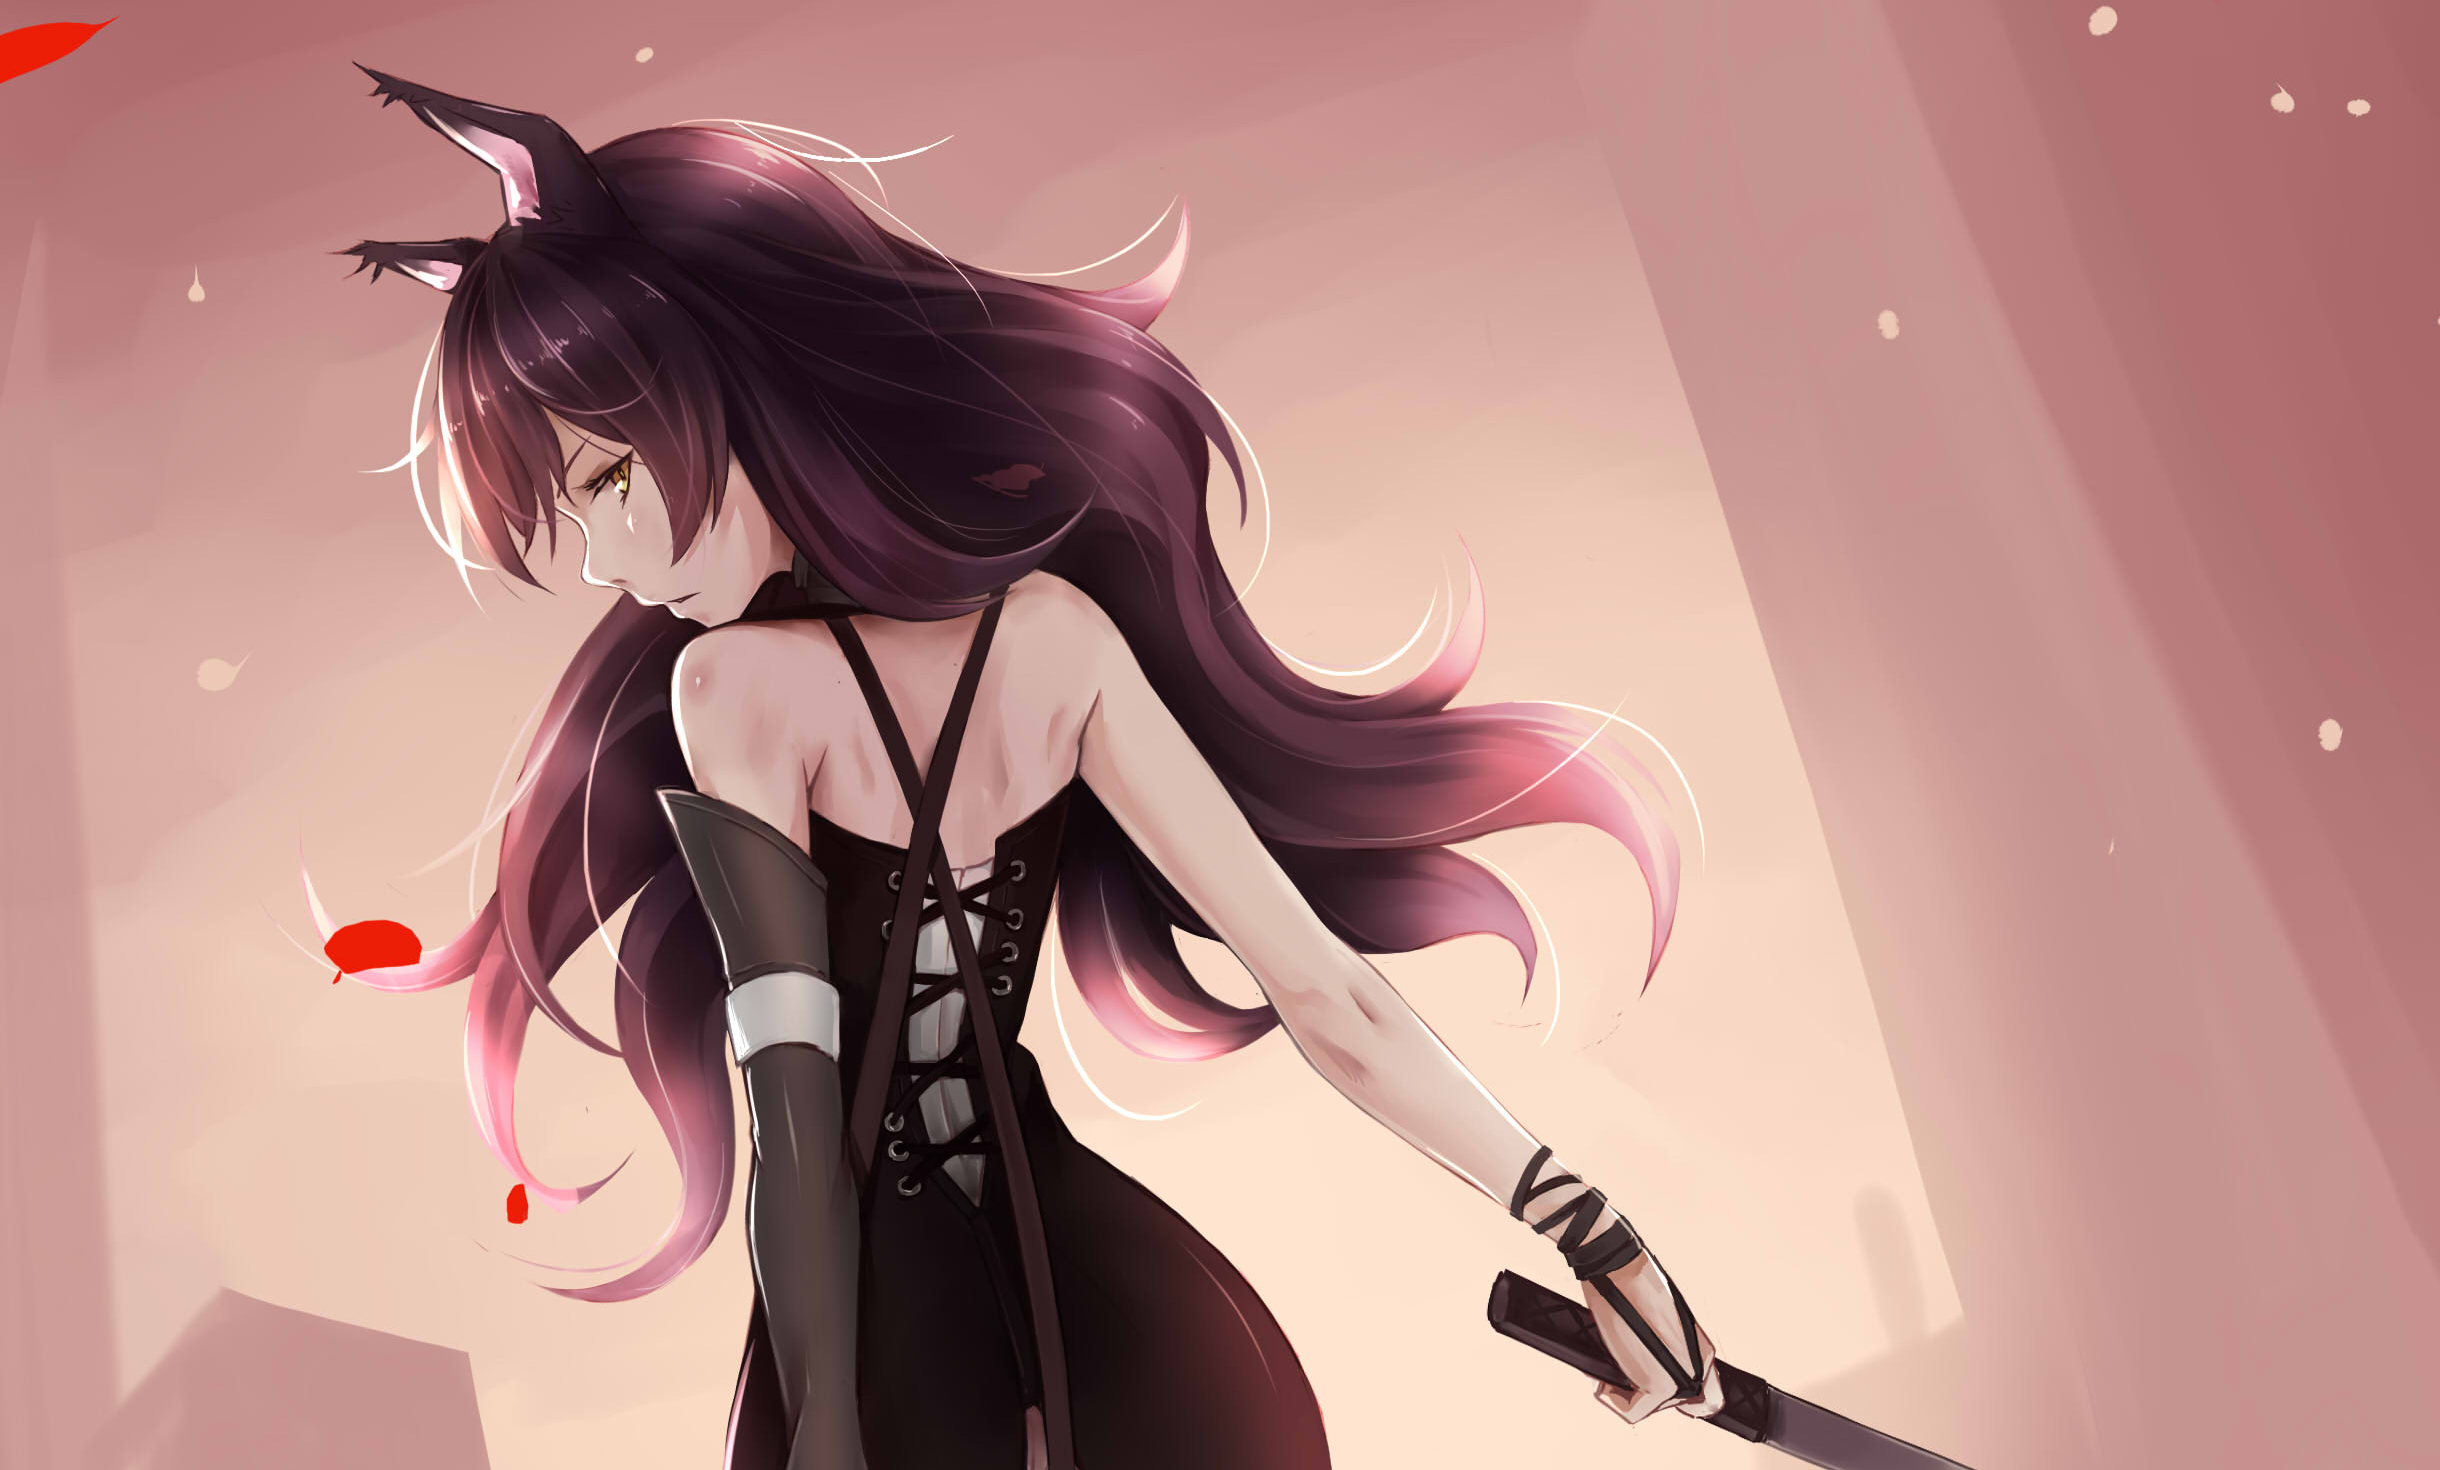 2440x1470 490+ Anime RWBY HD Wallpapers and Backgrounds